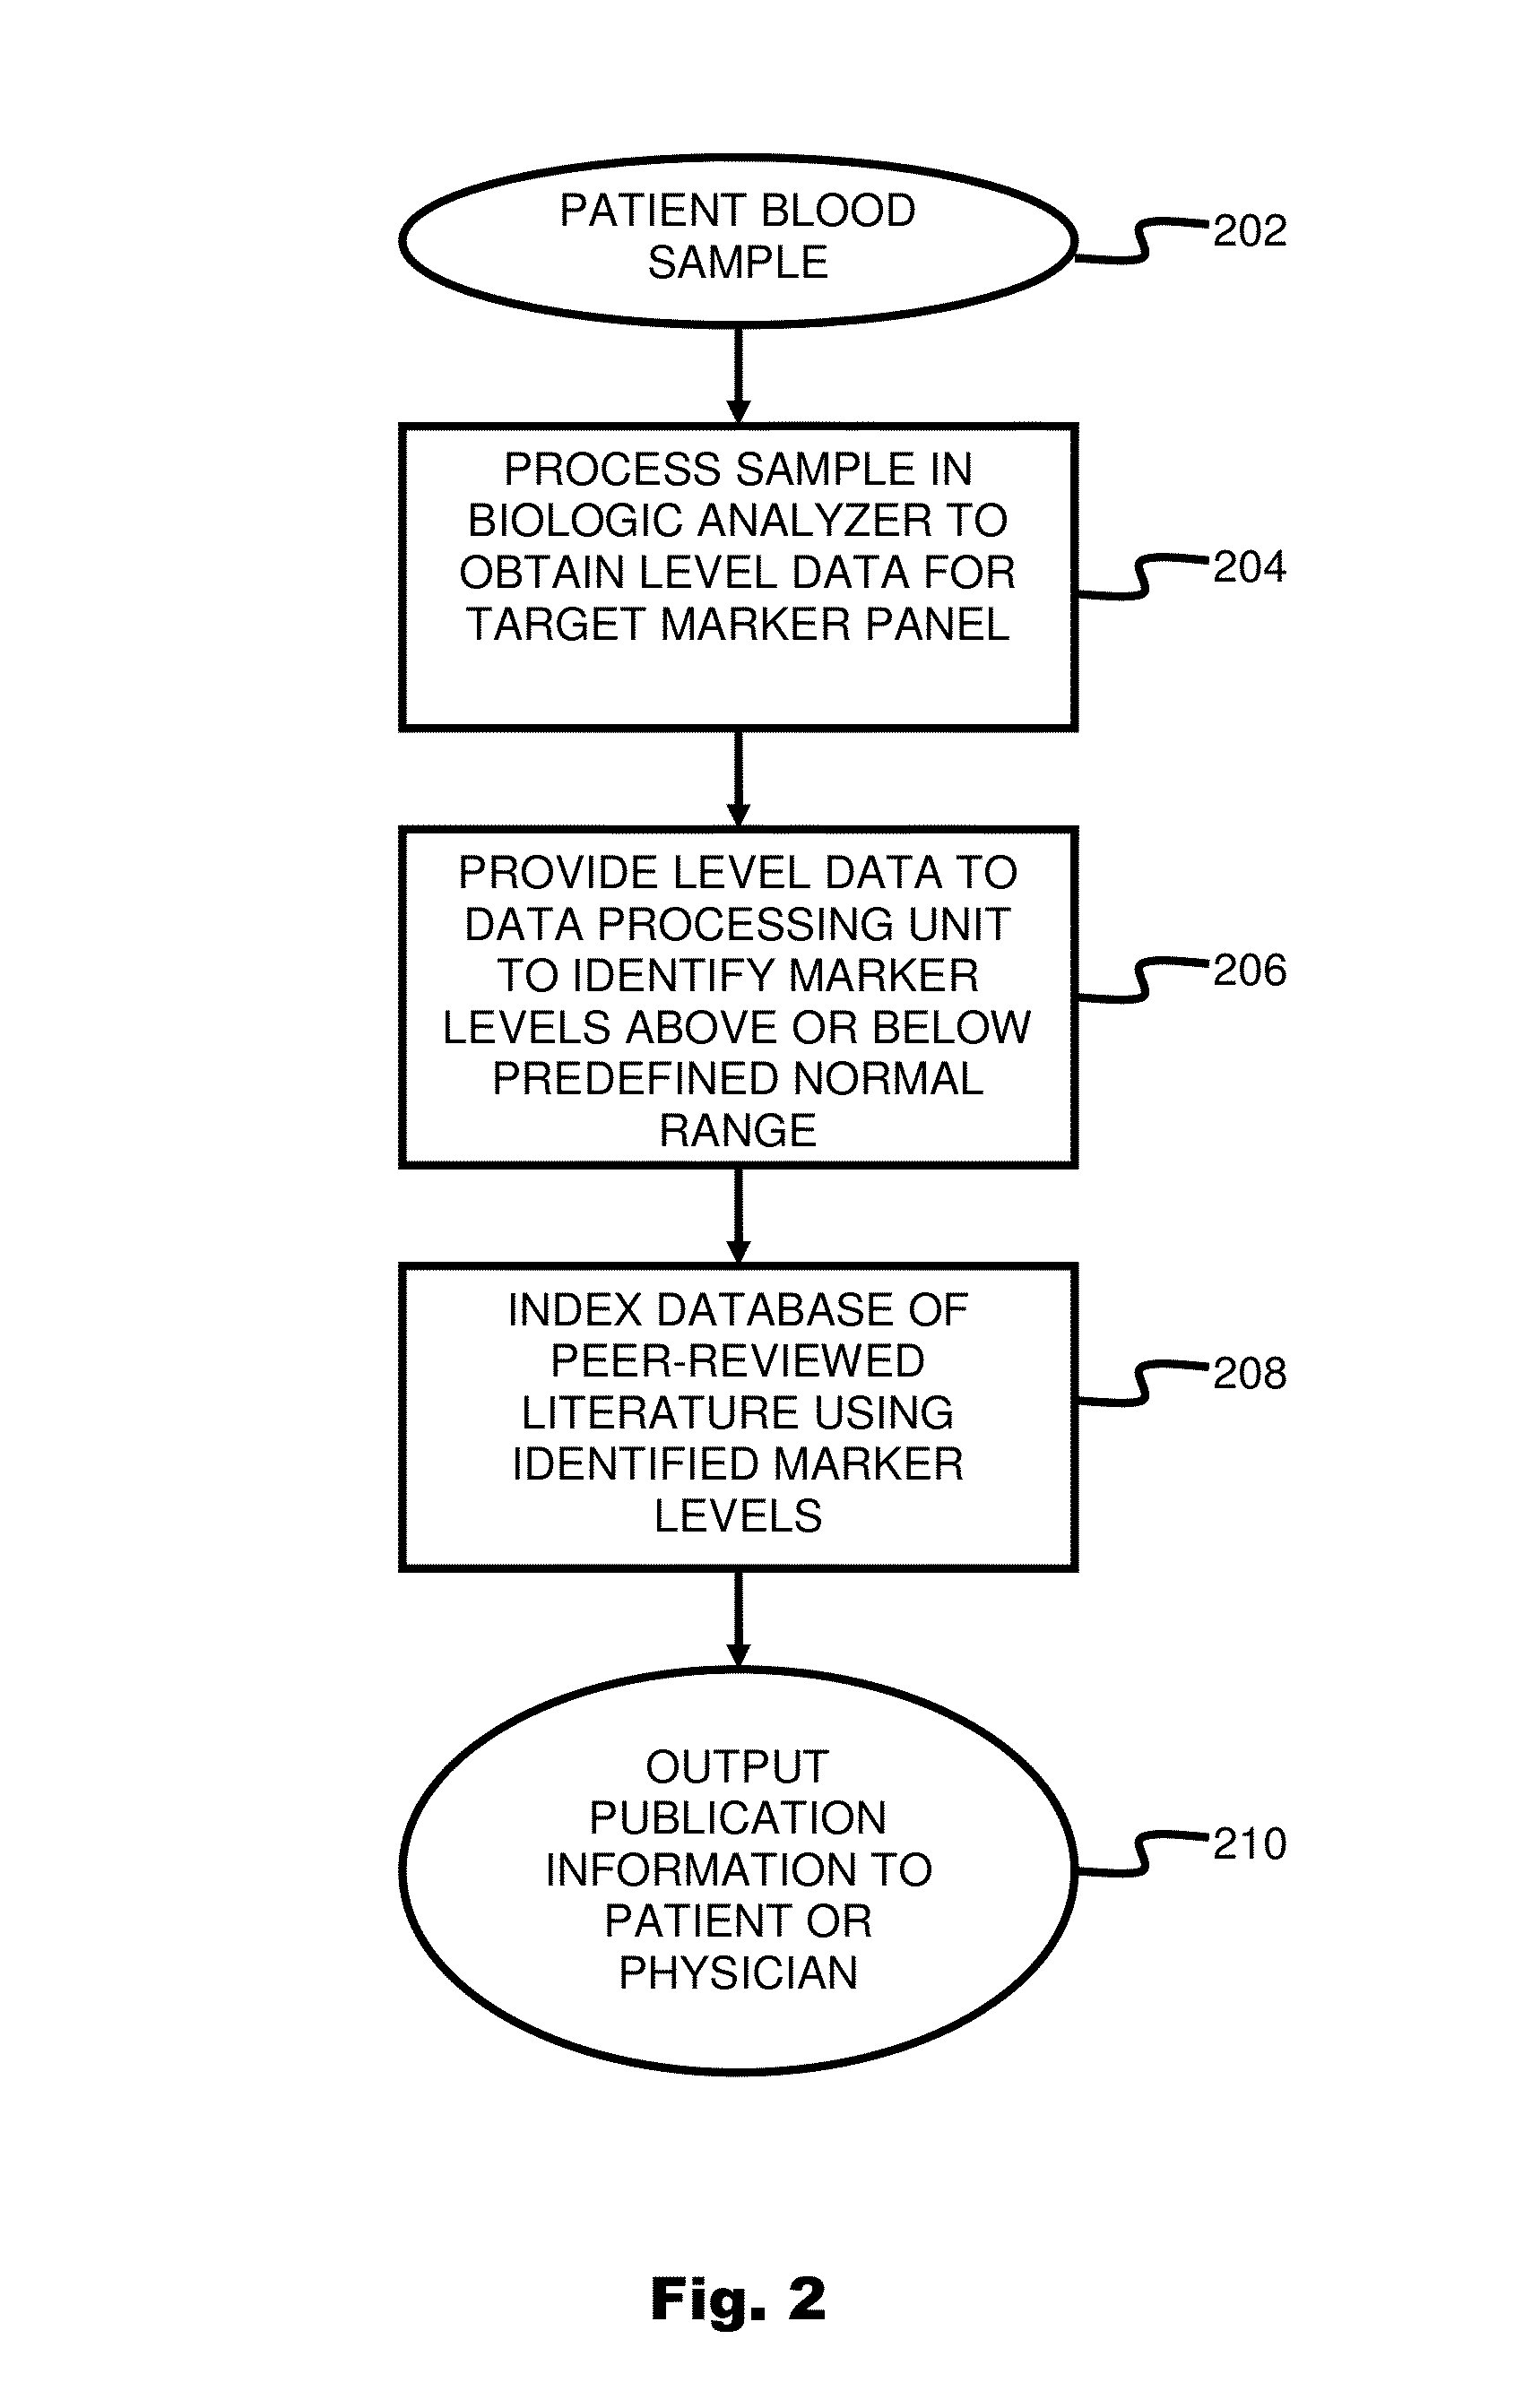 System and method for targeting relevant research activity in response to diagnostic marker analyses